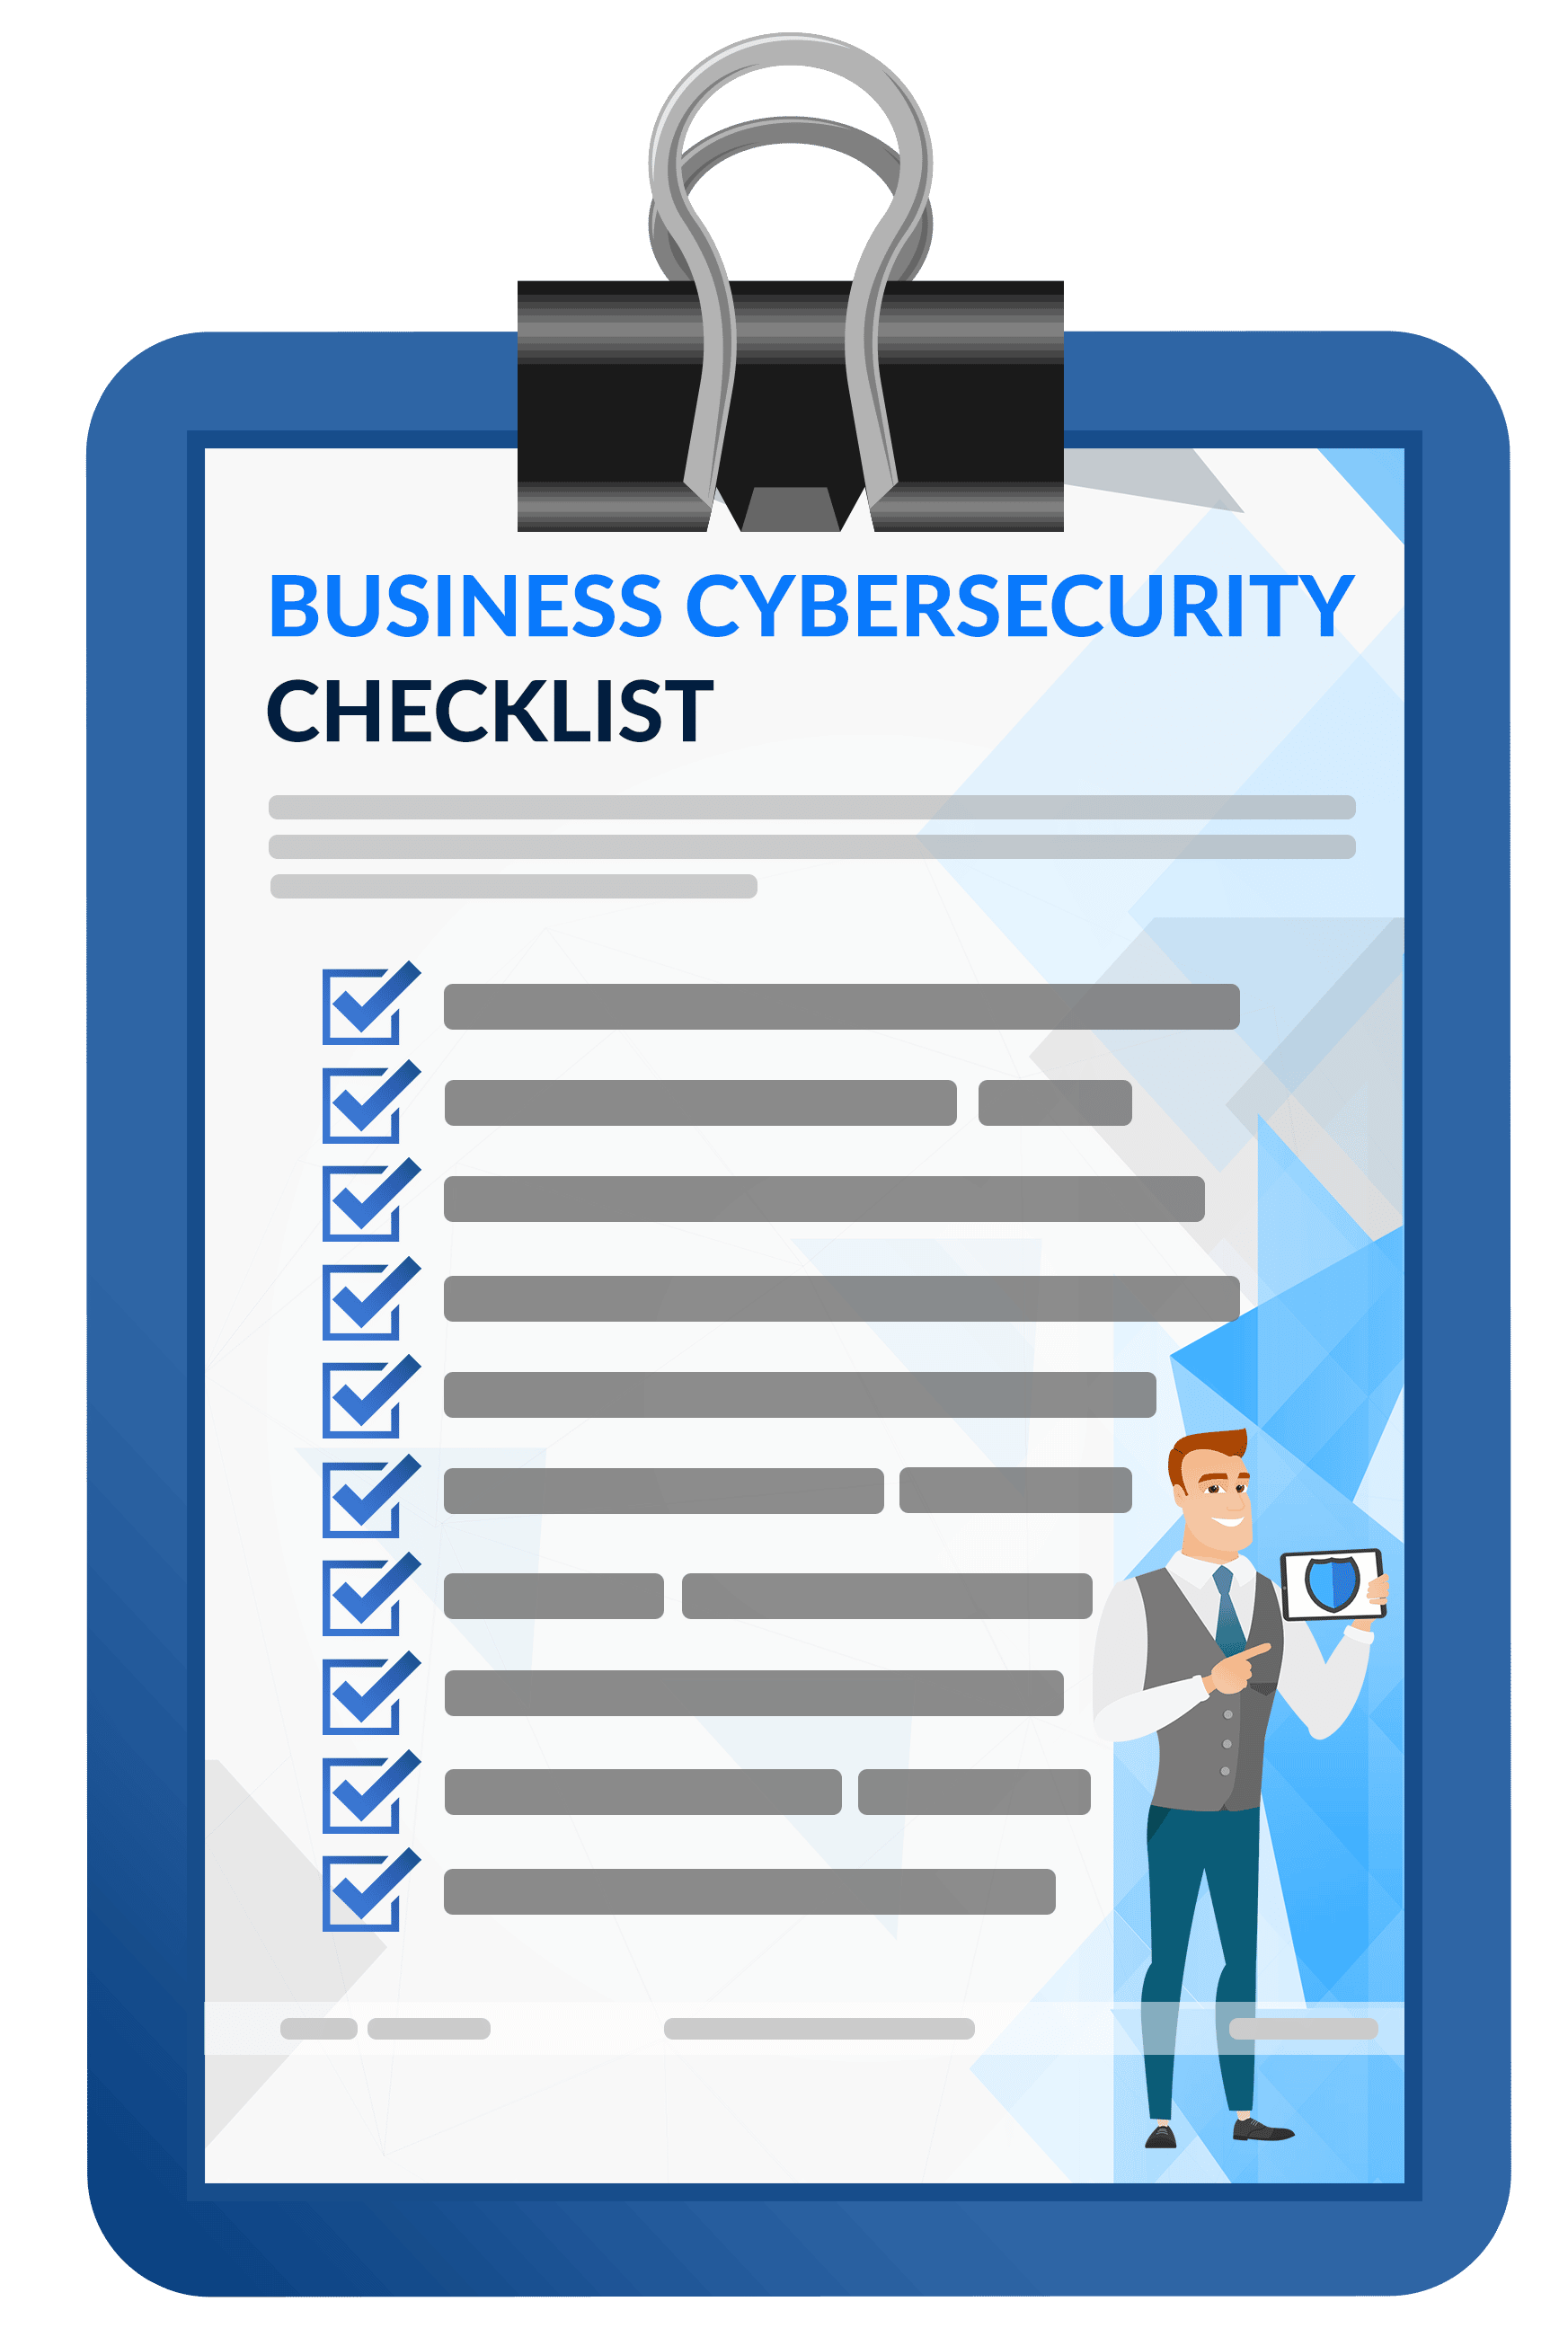 Business Cybersecurity Checklist